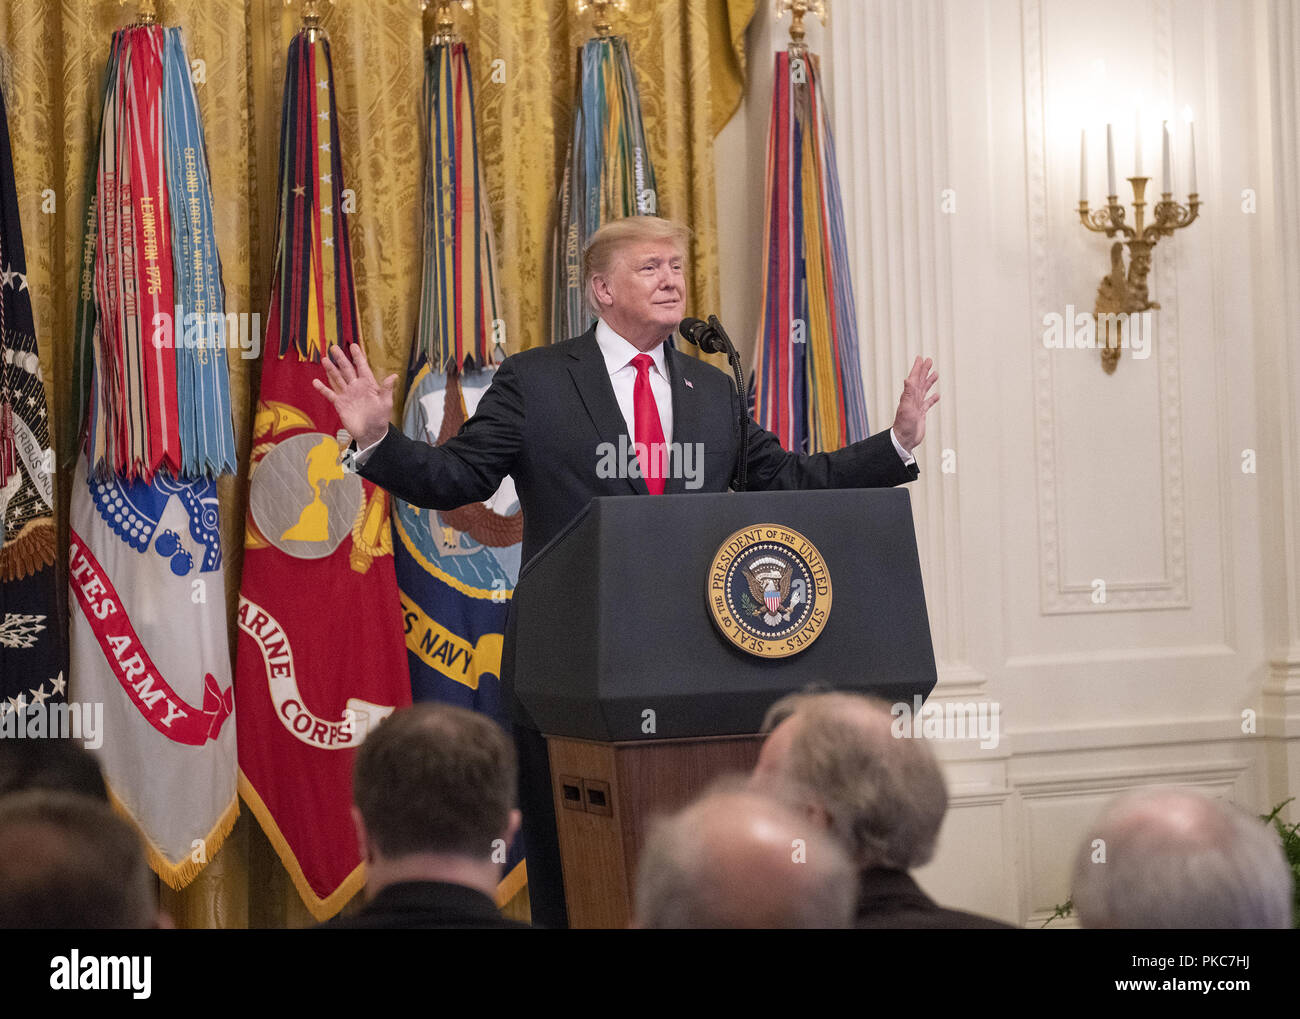 Washington, District of Columbia, USA. 12th Sep, 2018. United States President Donald J. Trump makes remarks at the Congressional Medal of Honor Society Reception in the East Room of the White House in Washington, DC on Wednesday, September 12, 2018 Credit: Ron Sachs/CNP/ZUMA Wire/Alamy Live News Stock Photo